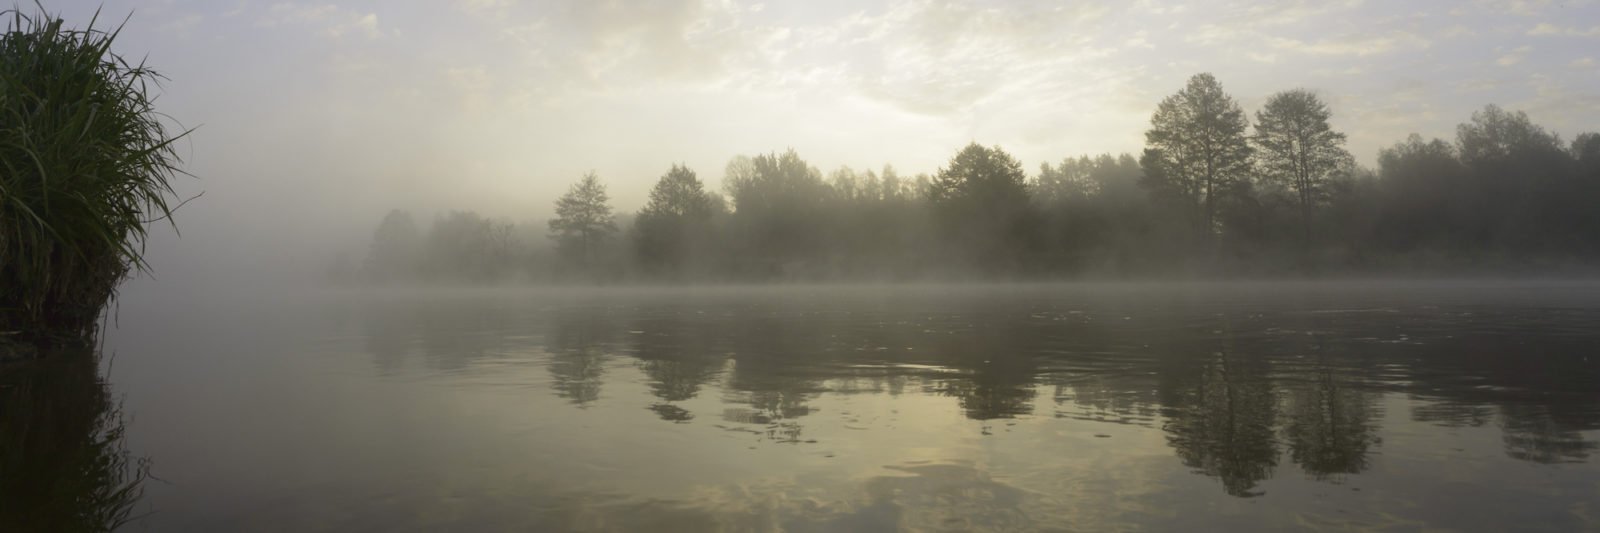 A river with fog on the surface of the water and trees along the bank